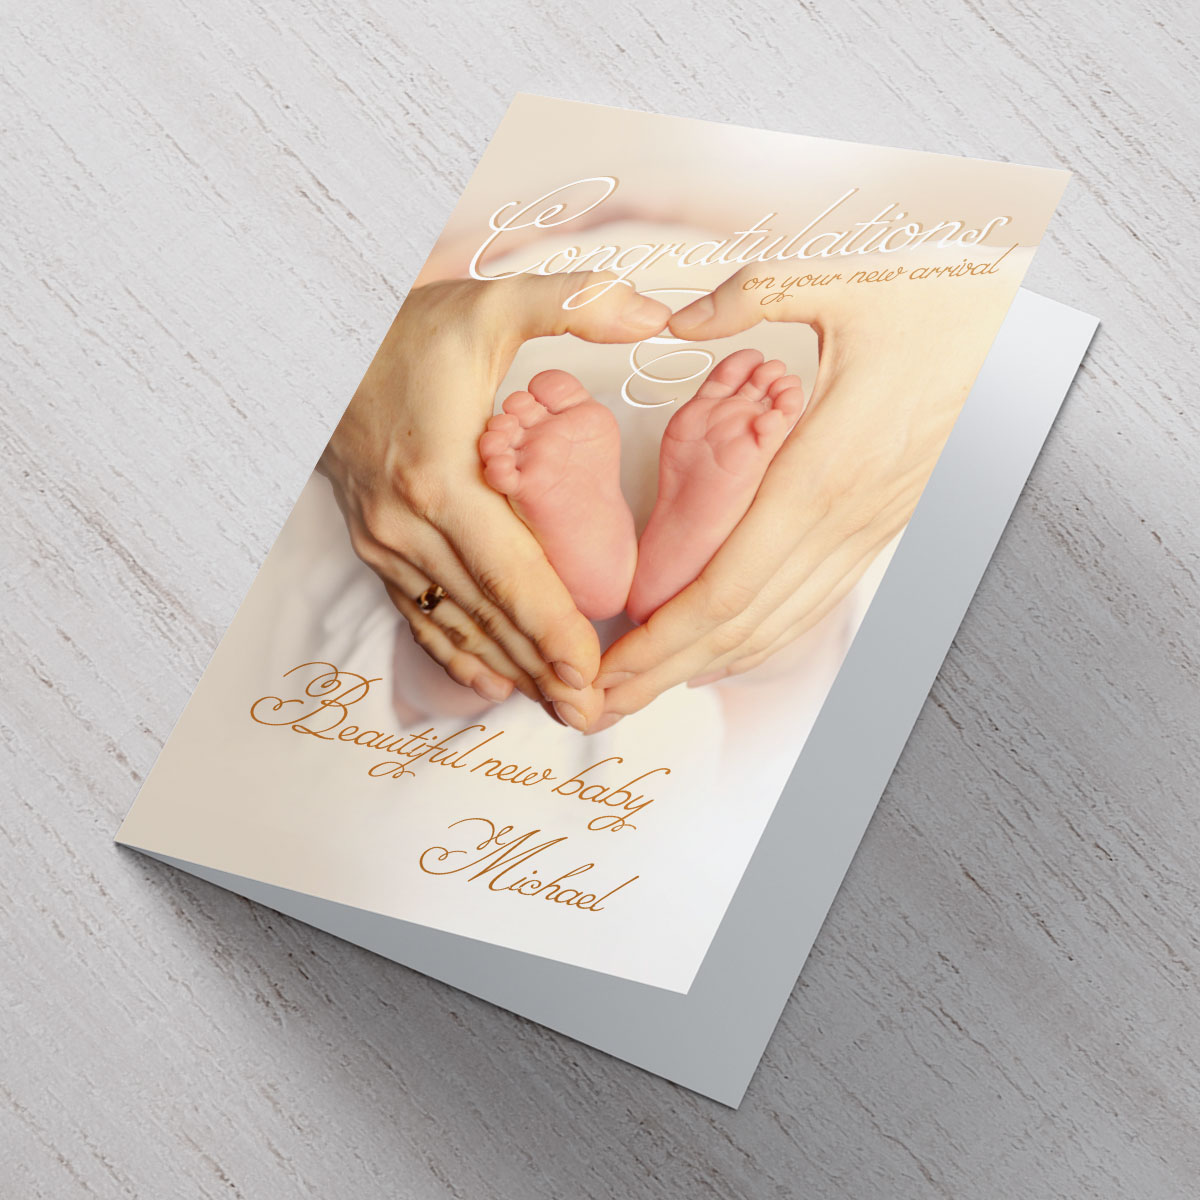 Personalised Card - Congratulations on your new arrival